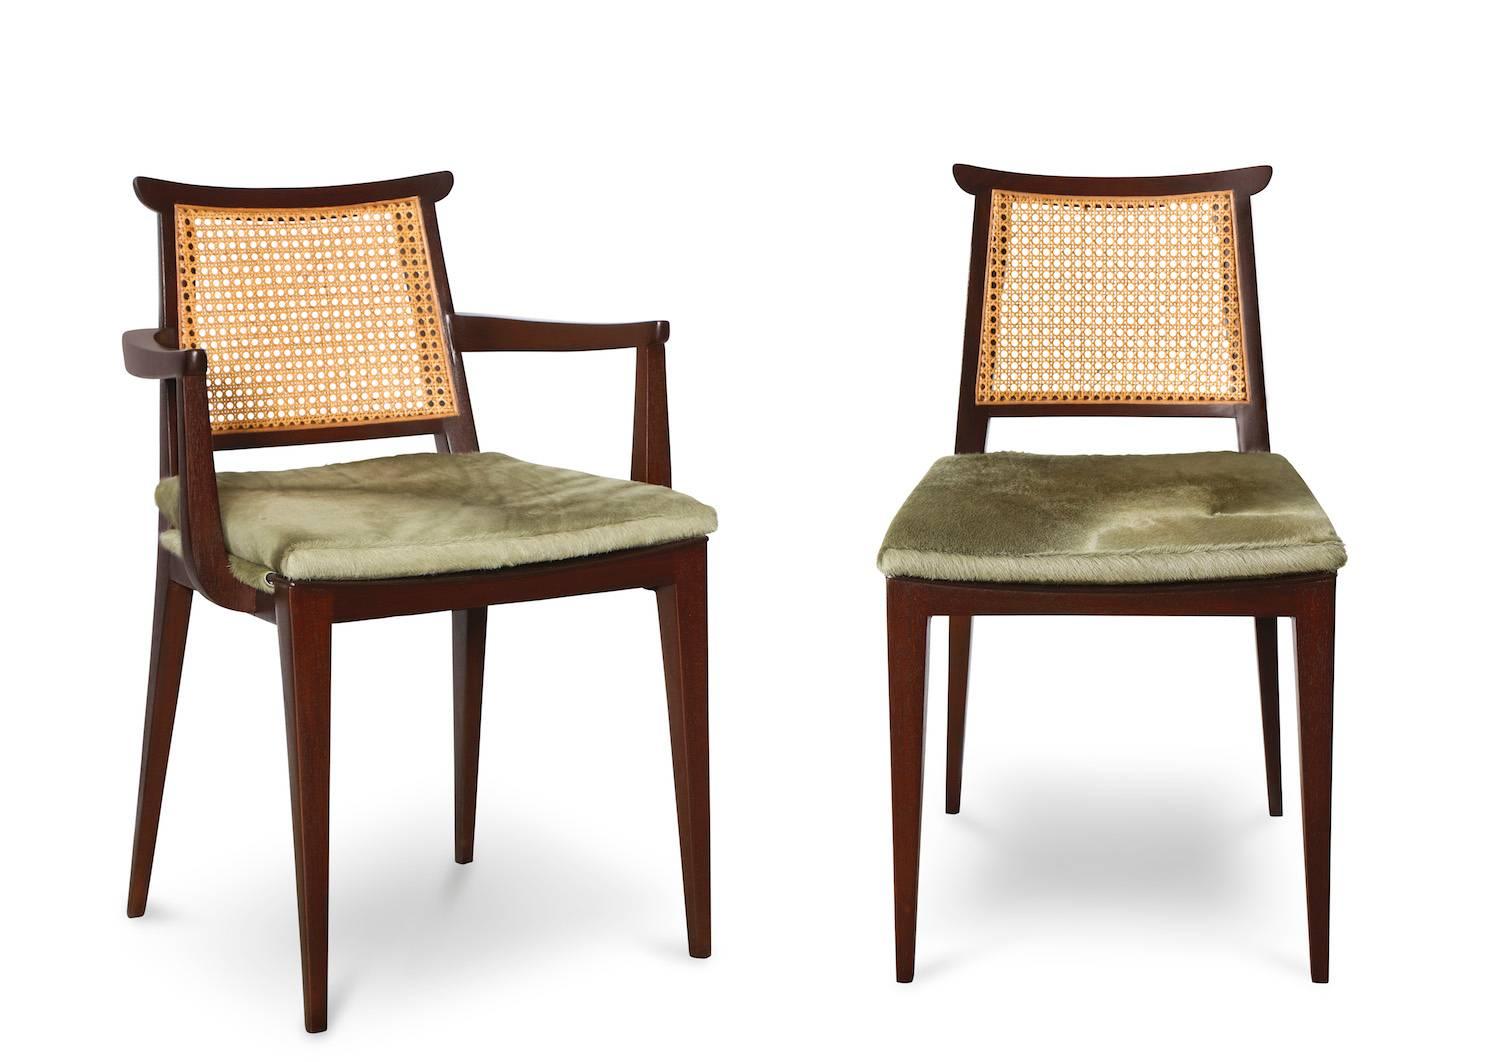 Set of ten dining chairs by Edward Wormley for Dunbar.  Asian-styled dark mahogany chairs with caned backs and removable seat cushions. A great set with two armchairs and eight side chairs. This entire set was recently restored, all seats recovered